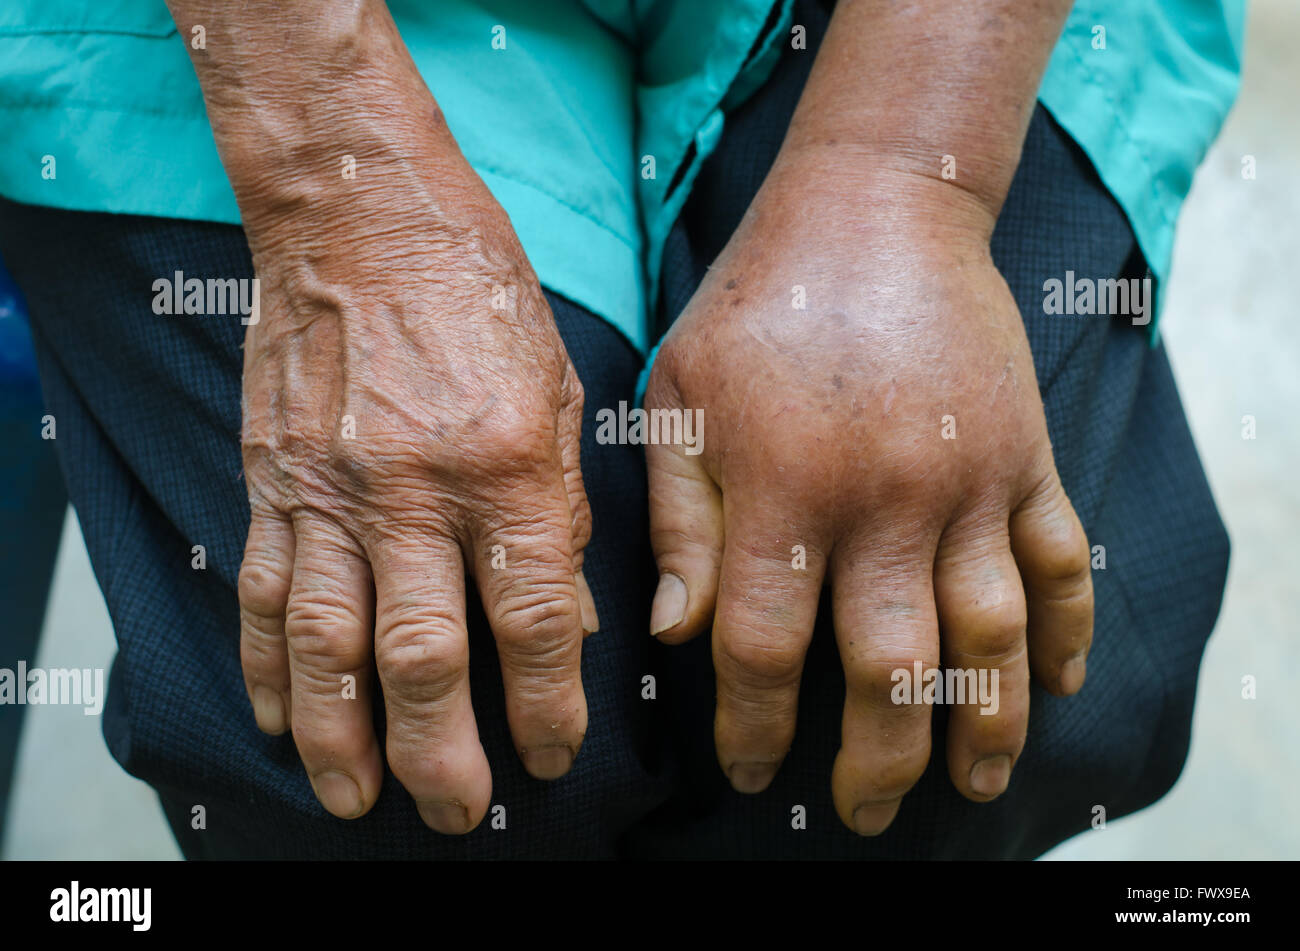 left hand inflammation from the green pit viperb snake bite Stock Photo